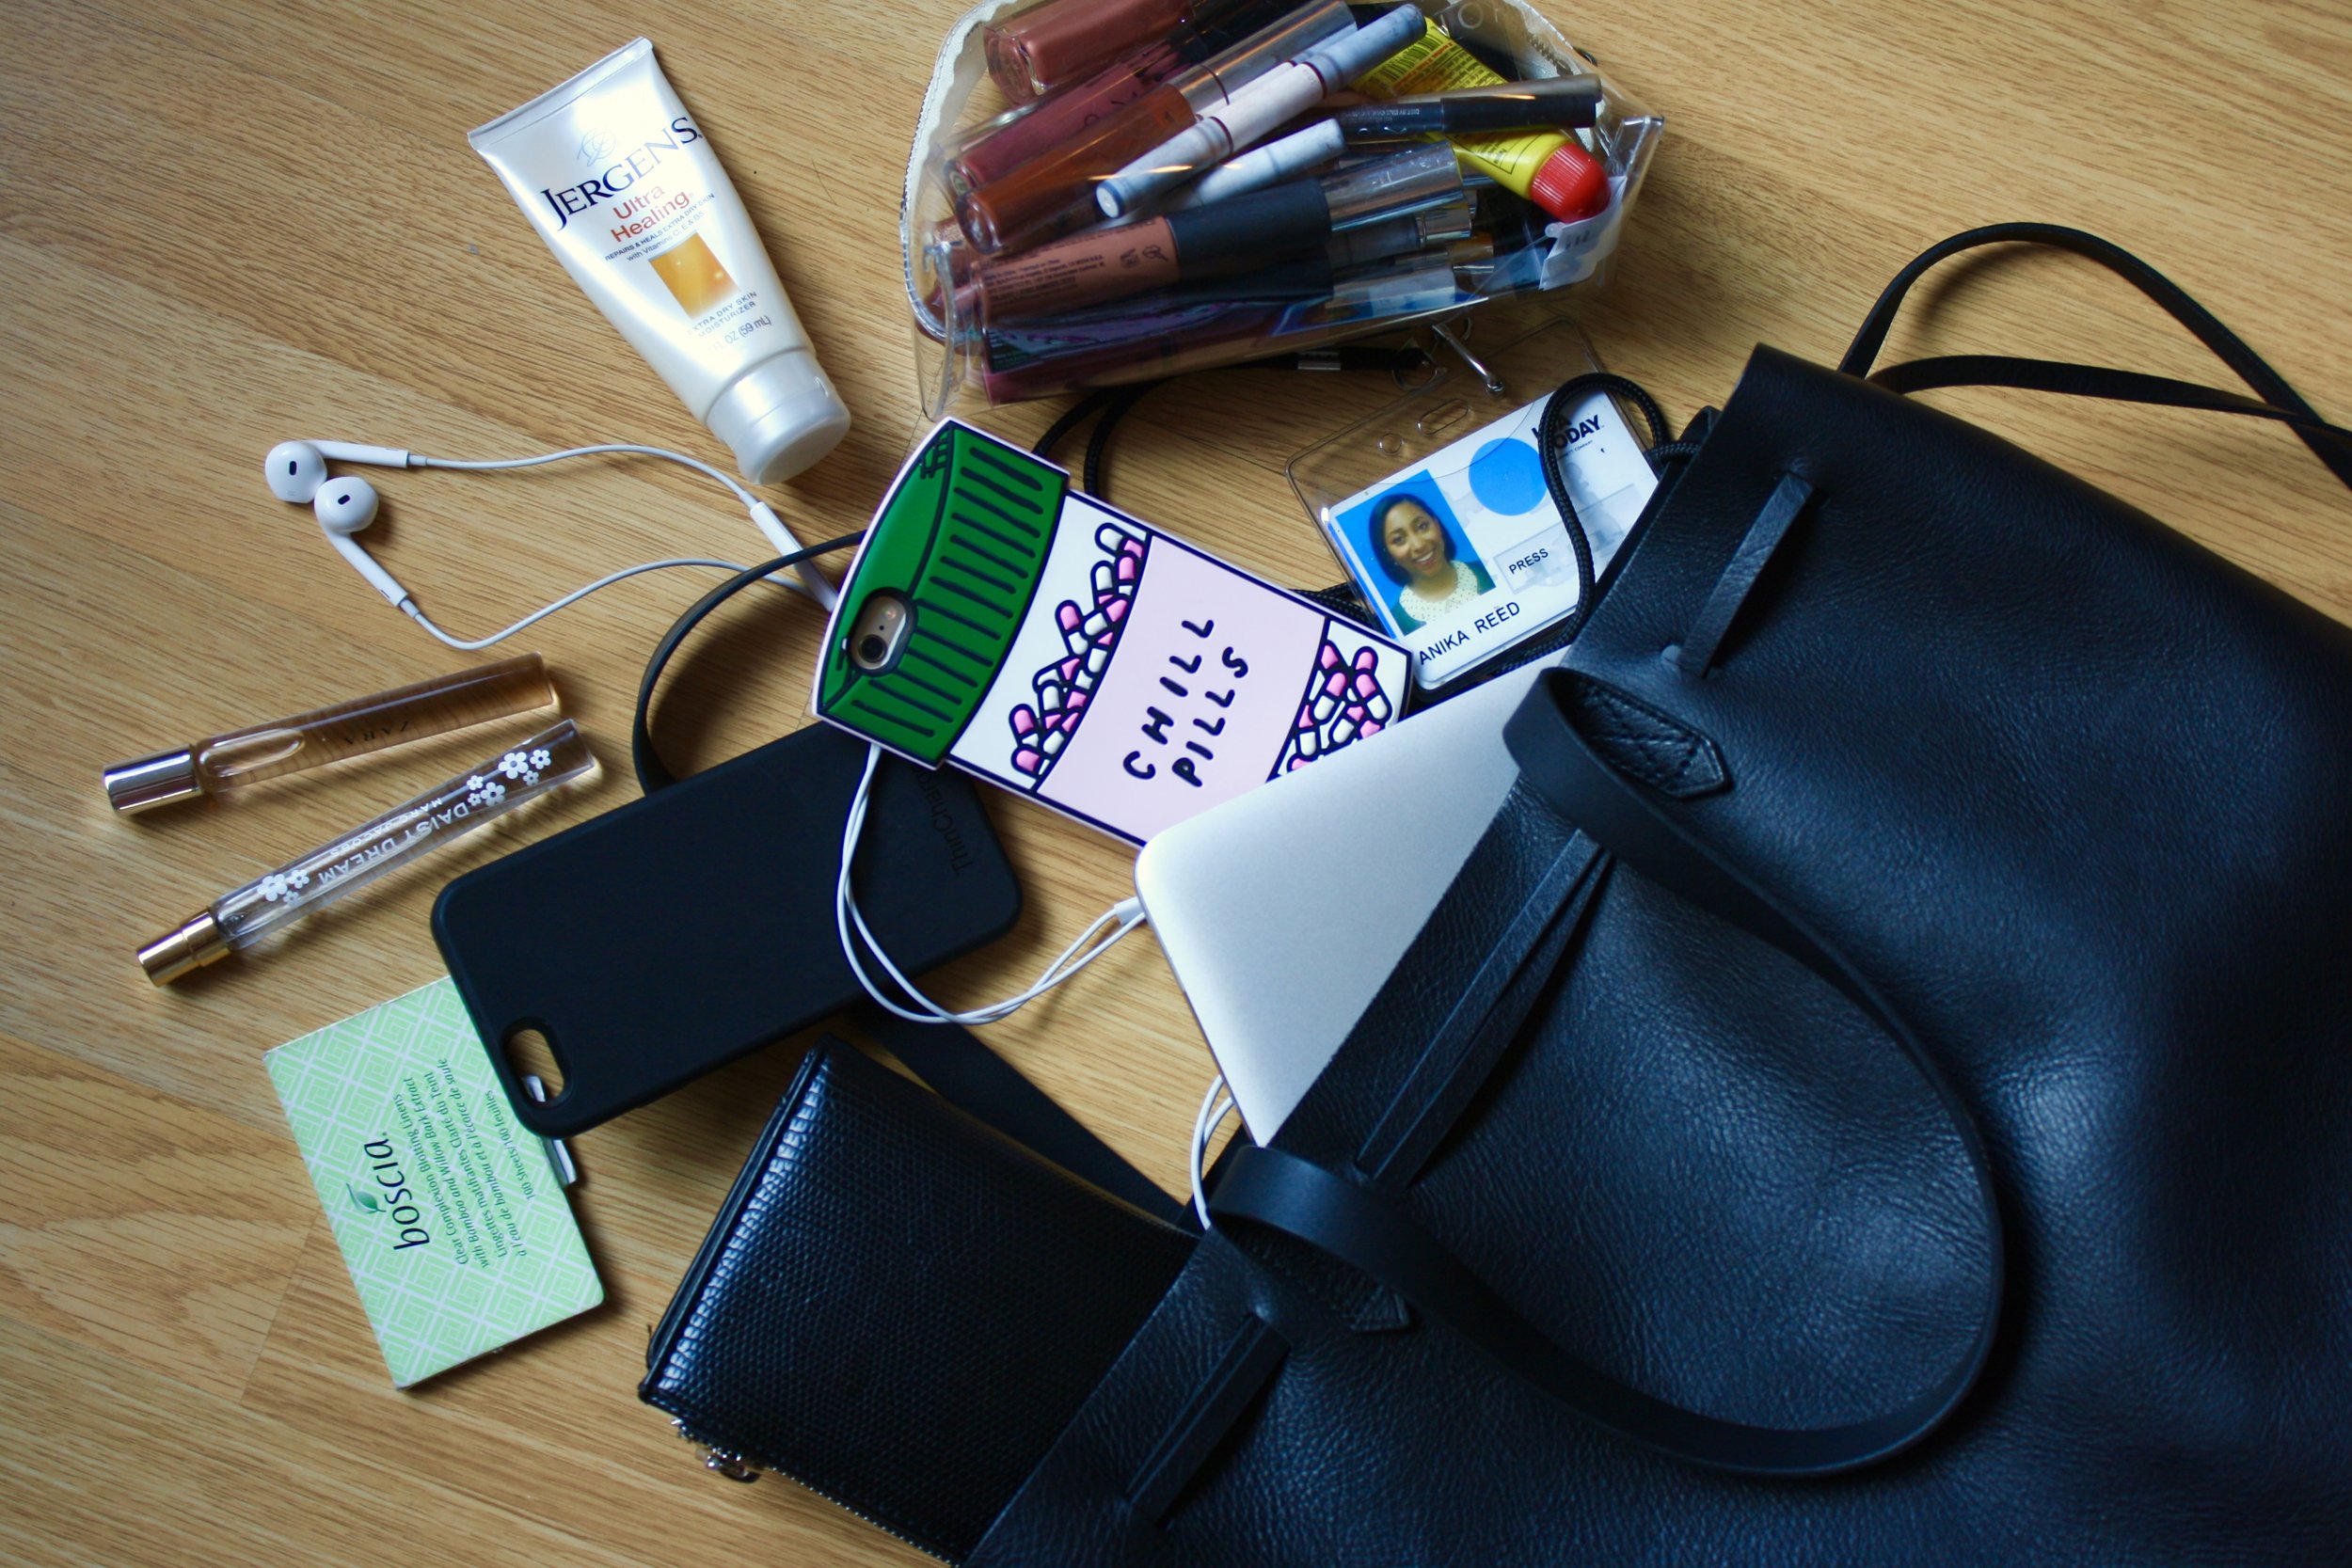 whats in my bag, daily essentials